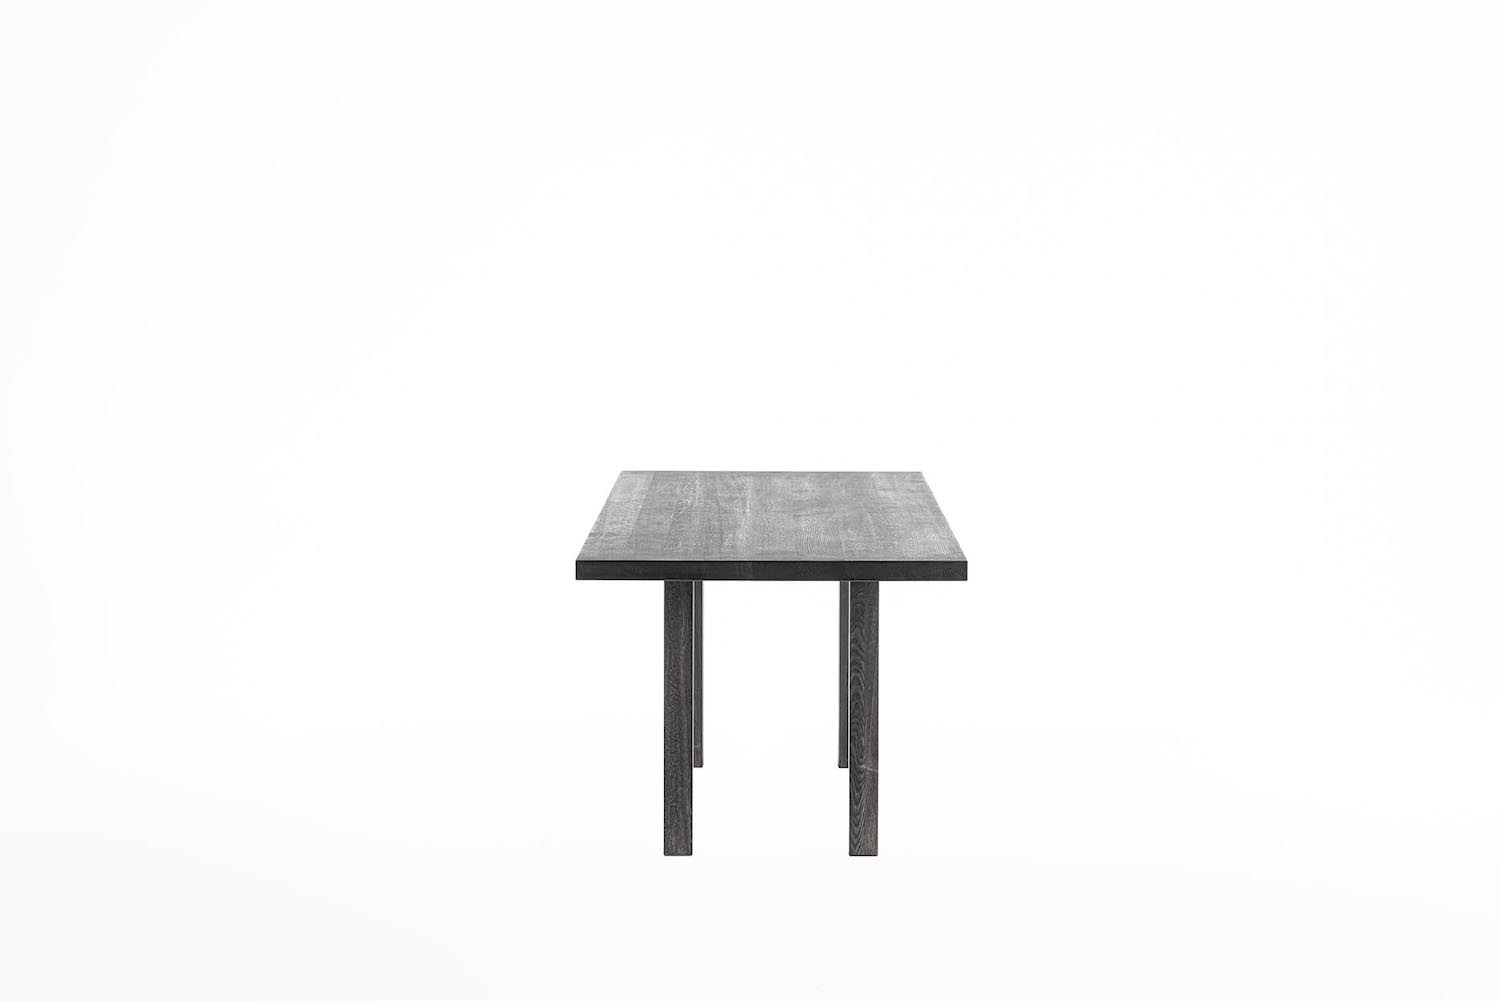 Atelier Zumthor working table Peter Zumthor collection